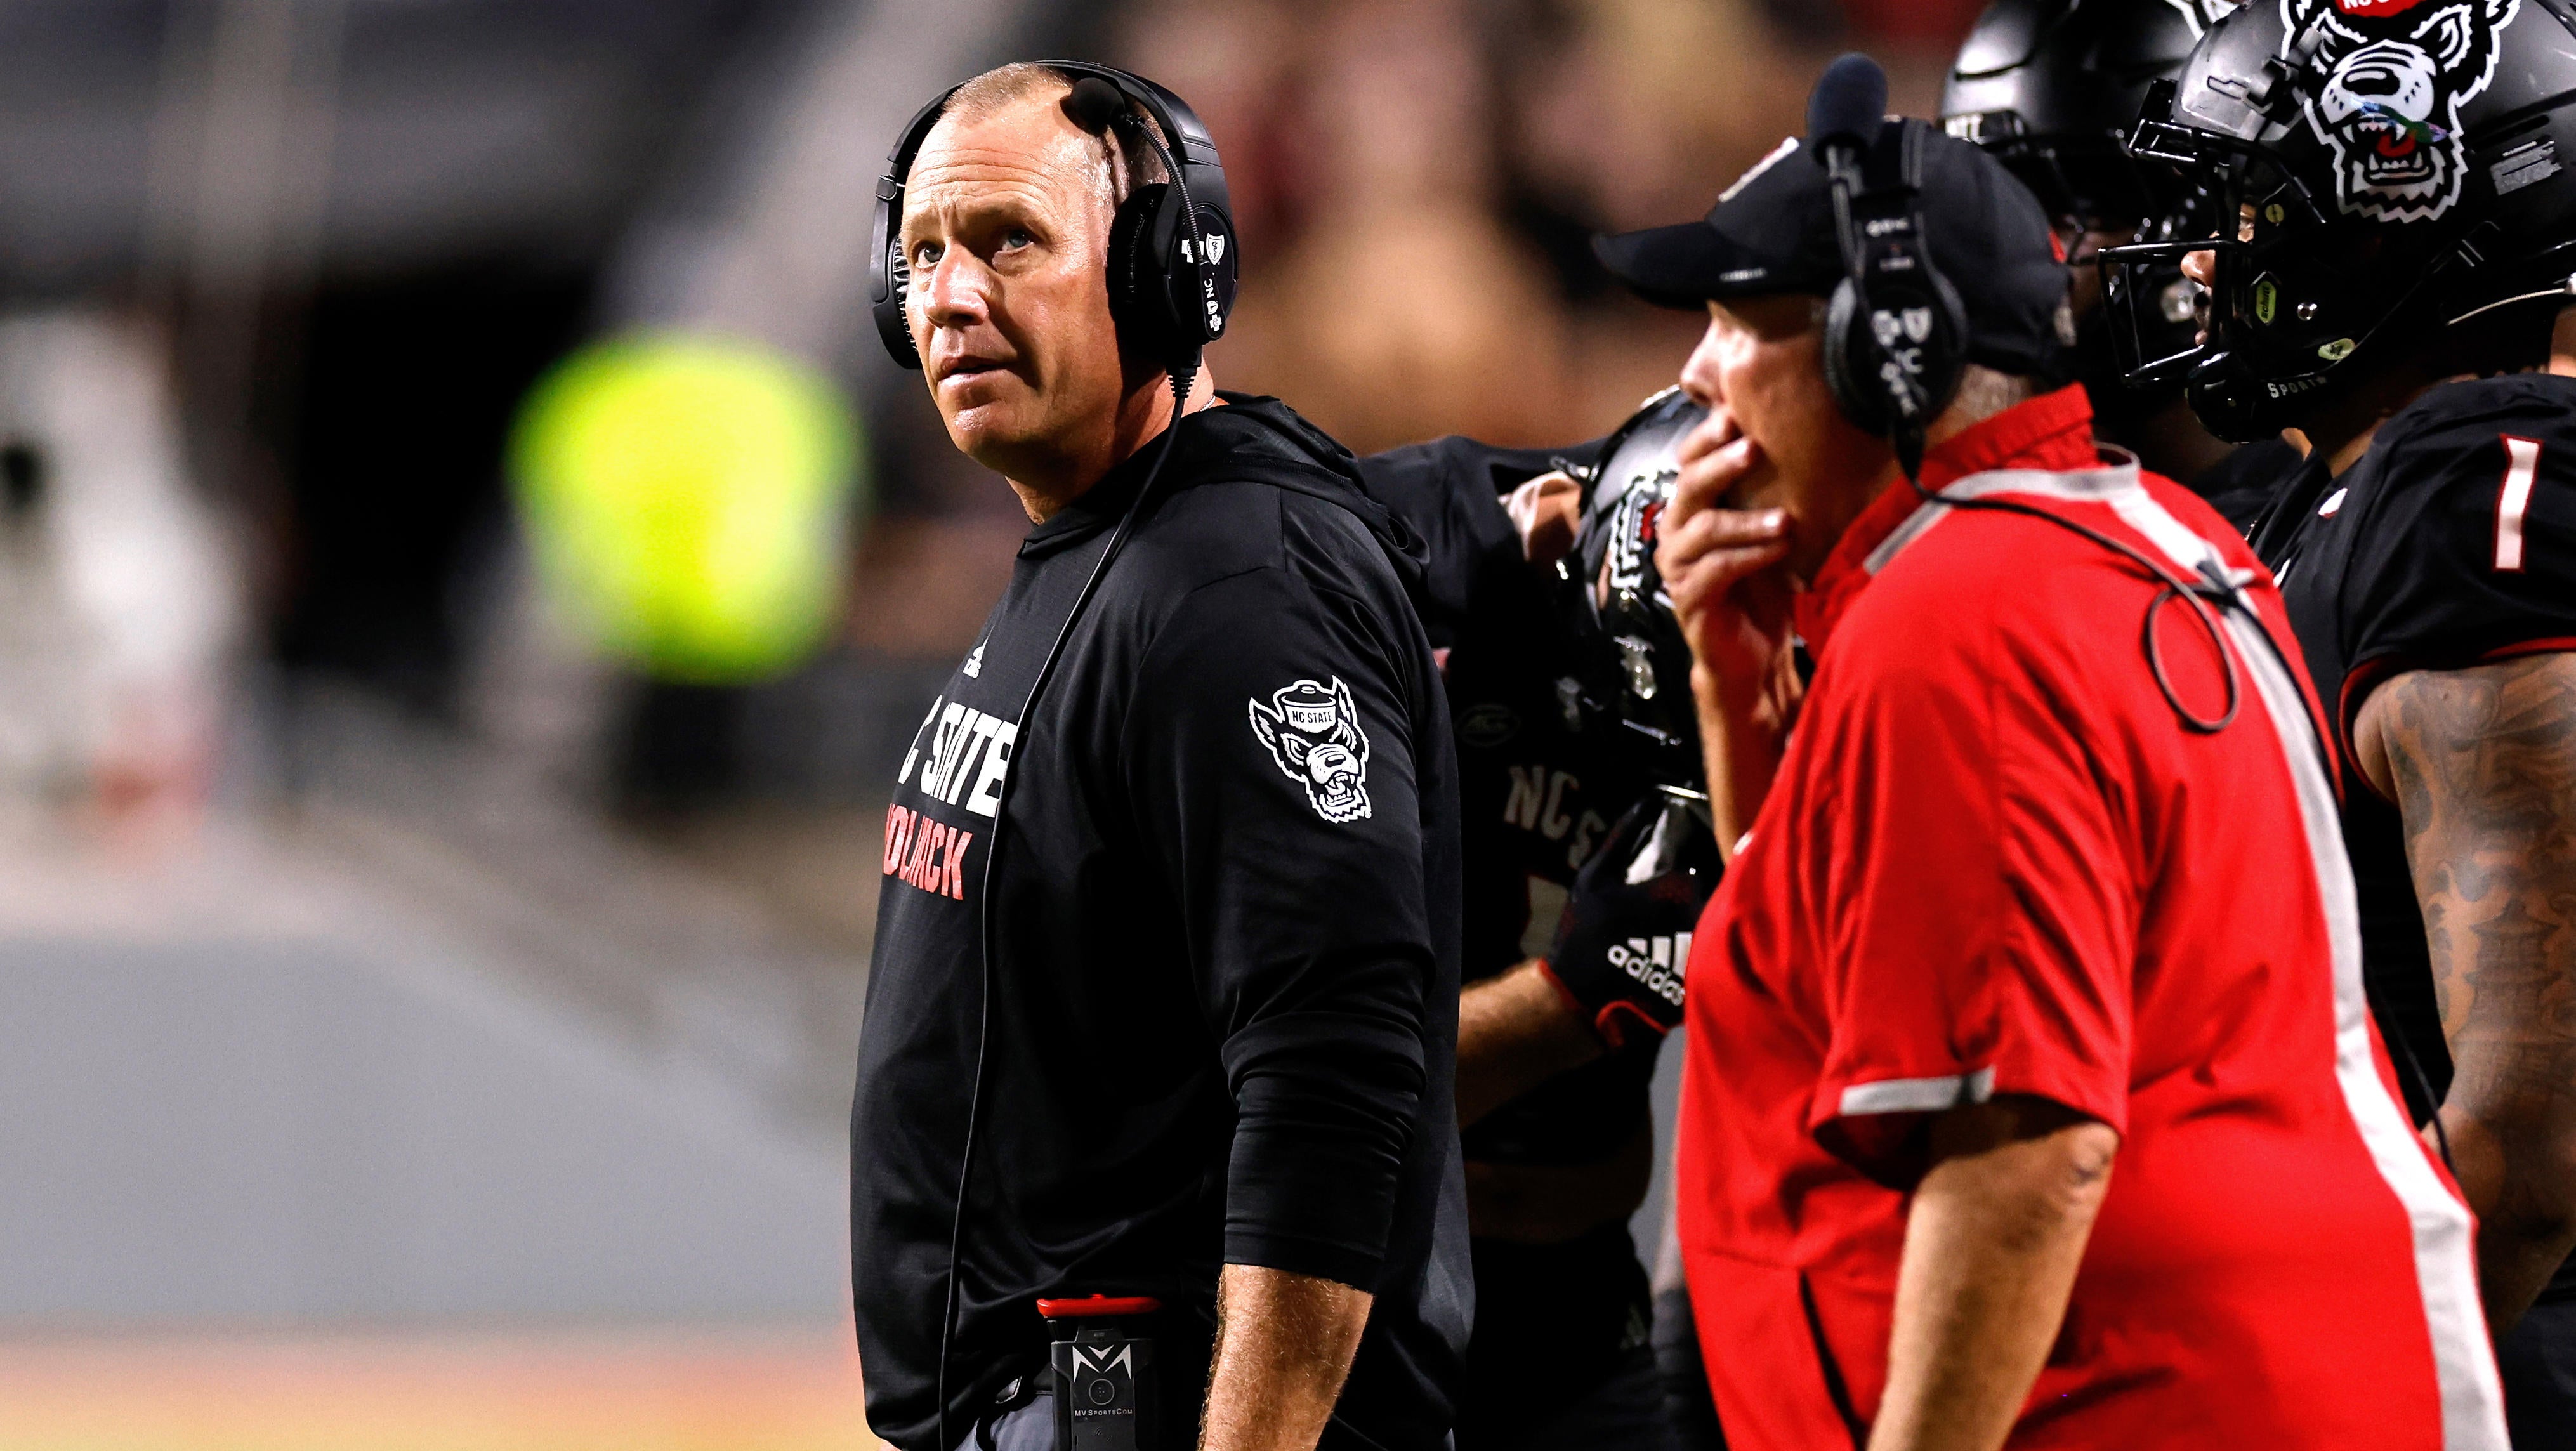 NC State coach Dave Doeren blasts Steve Smith Sr. for ‘basketball school’ crack: ‘He can kiss my ass’